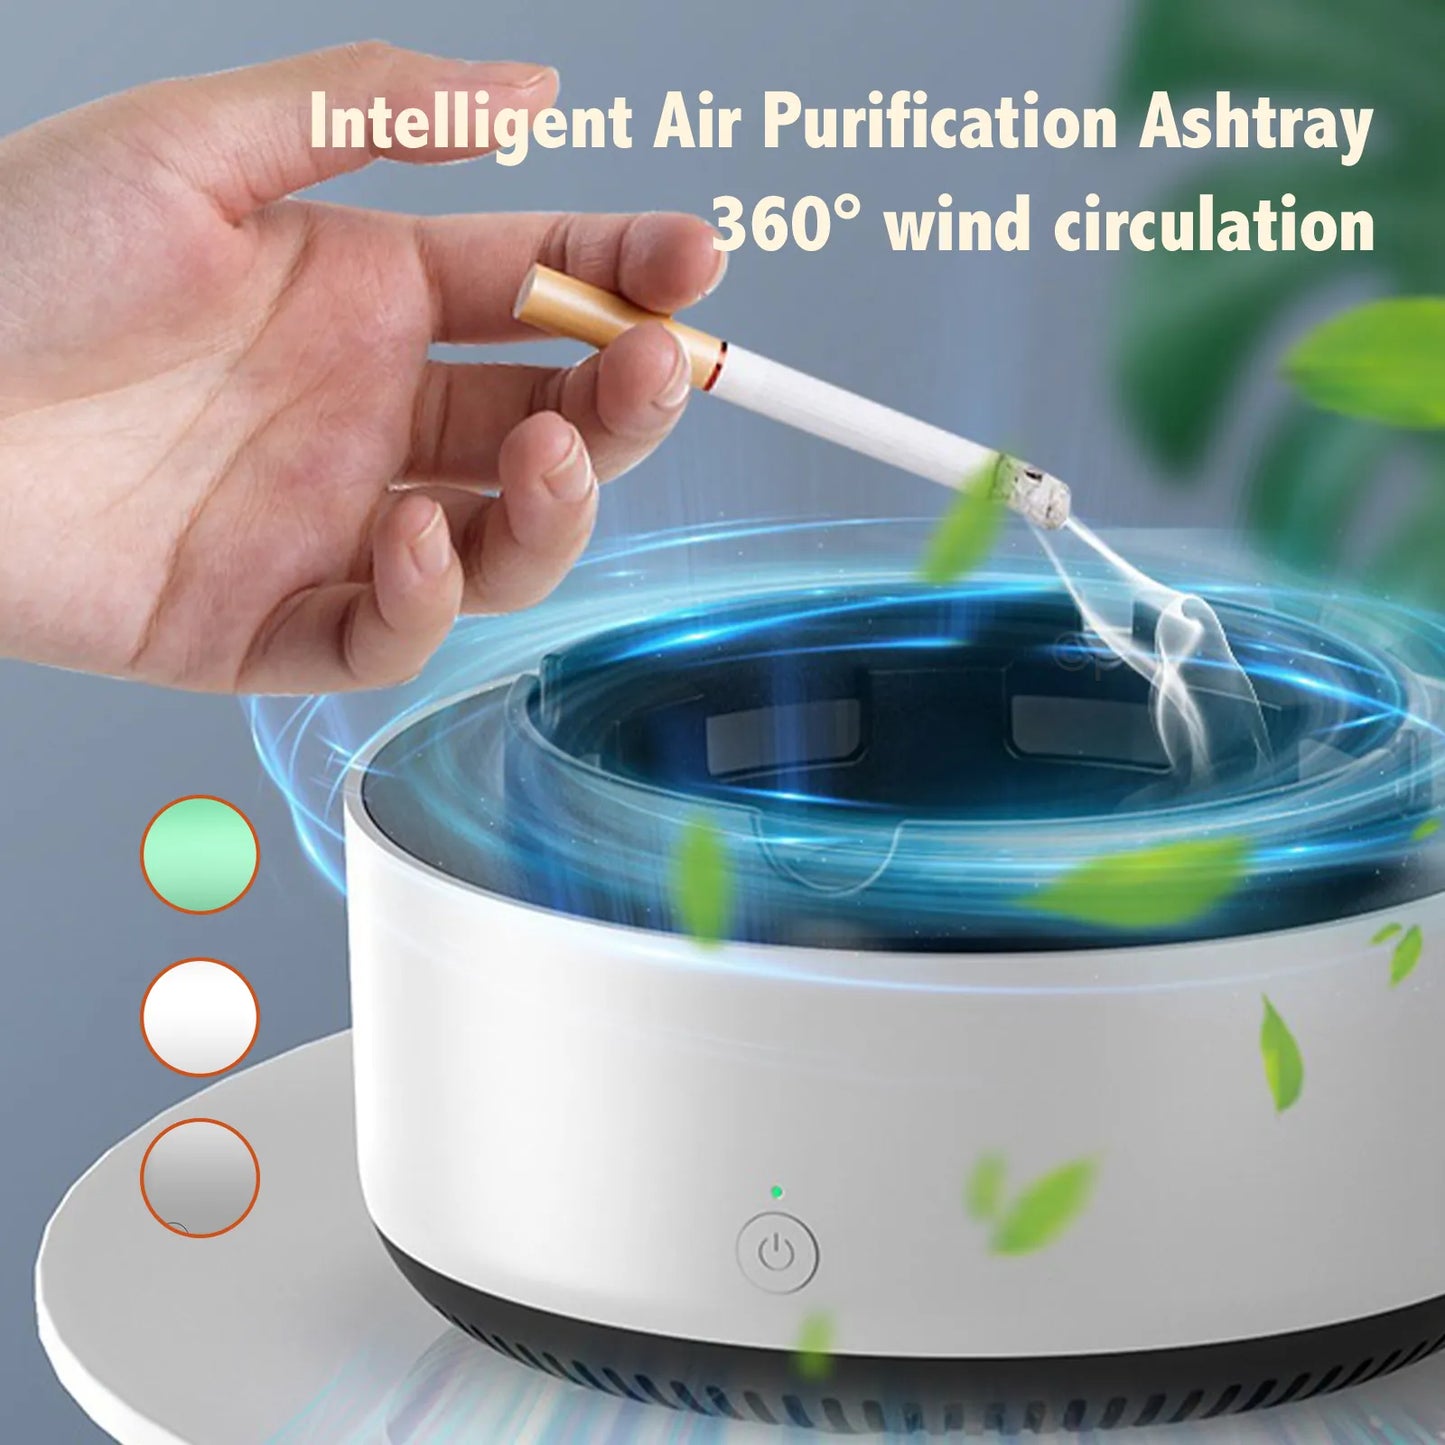 Smart Cigarette Ashtray Air Purifier,Remove Secondhand Smoke and Tobacco Odor Instantly,Batteries Not Included